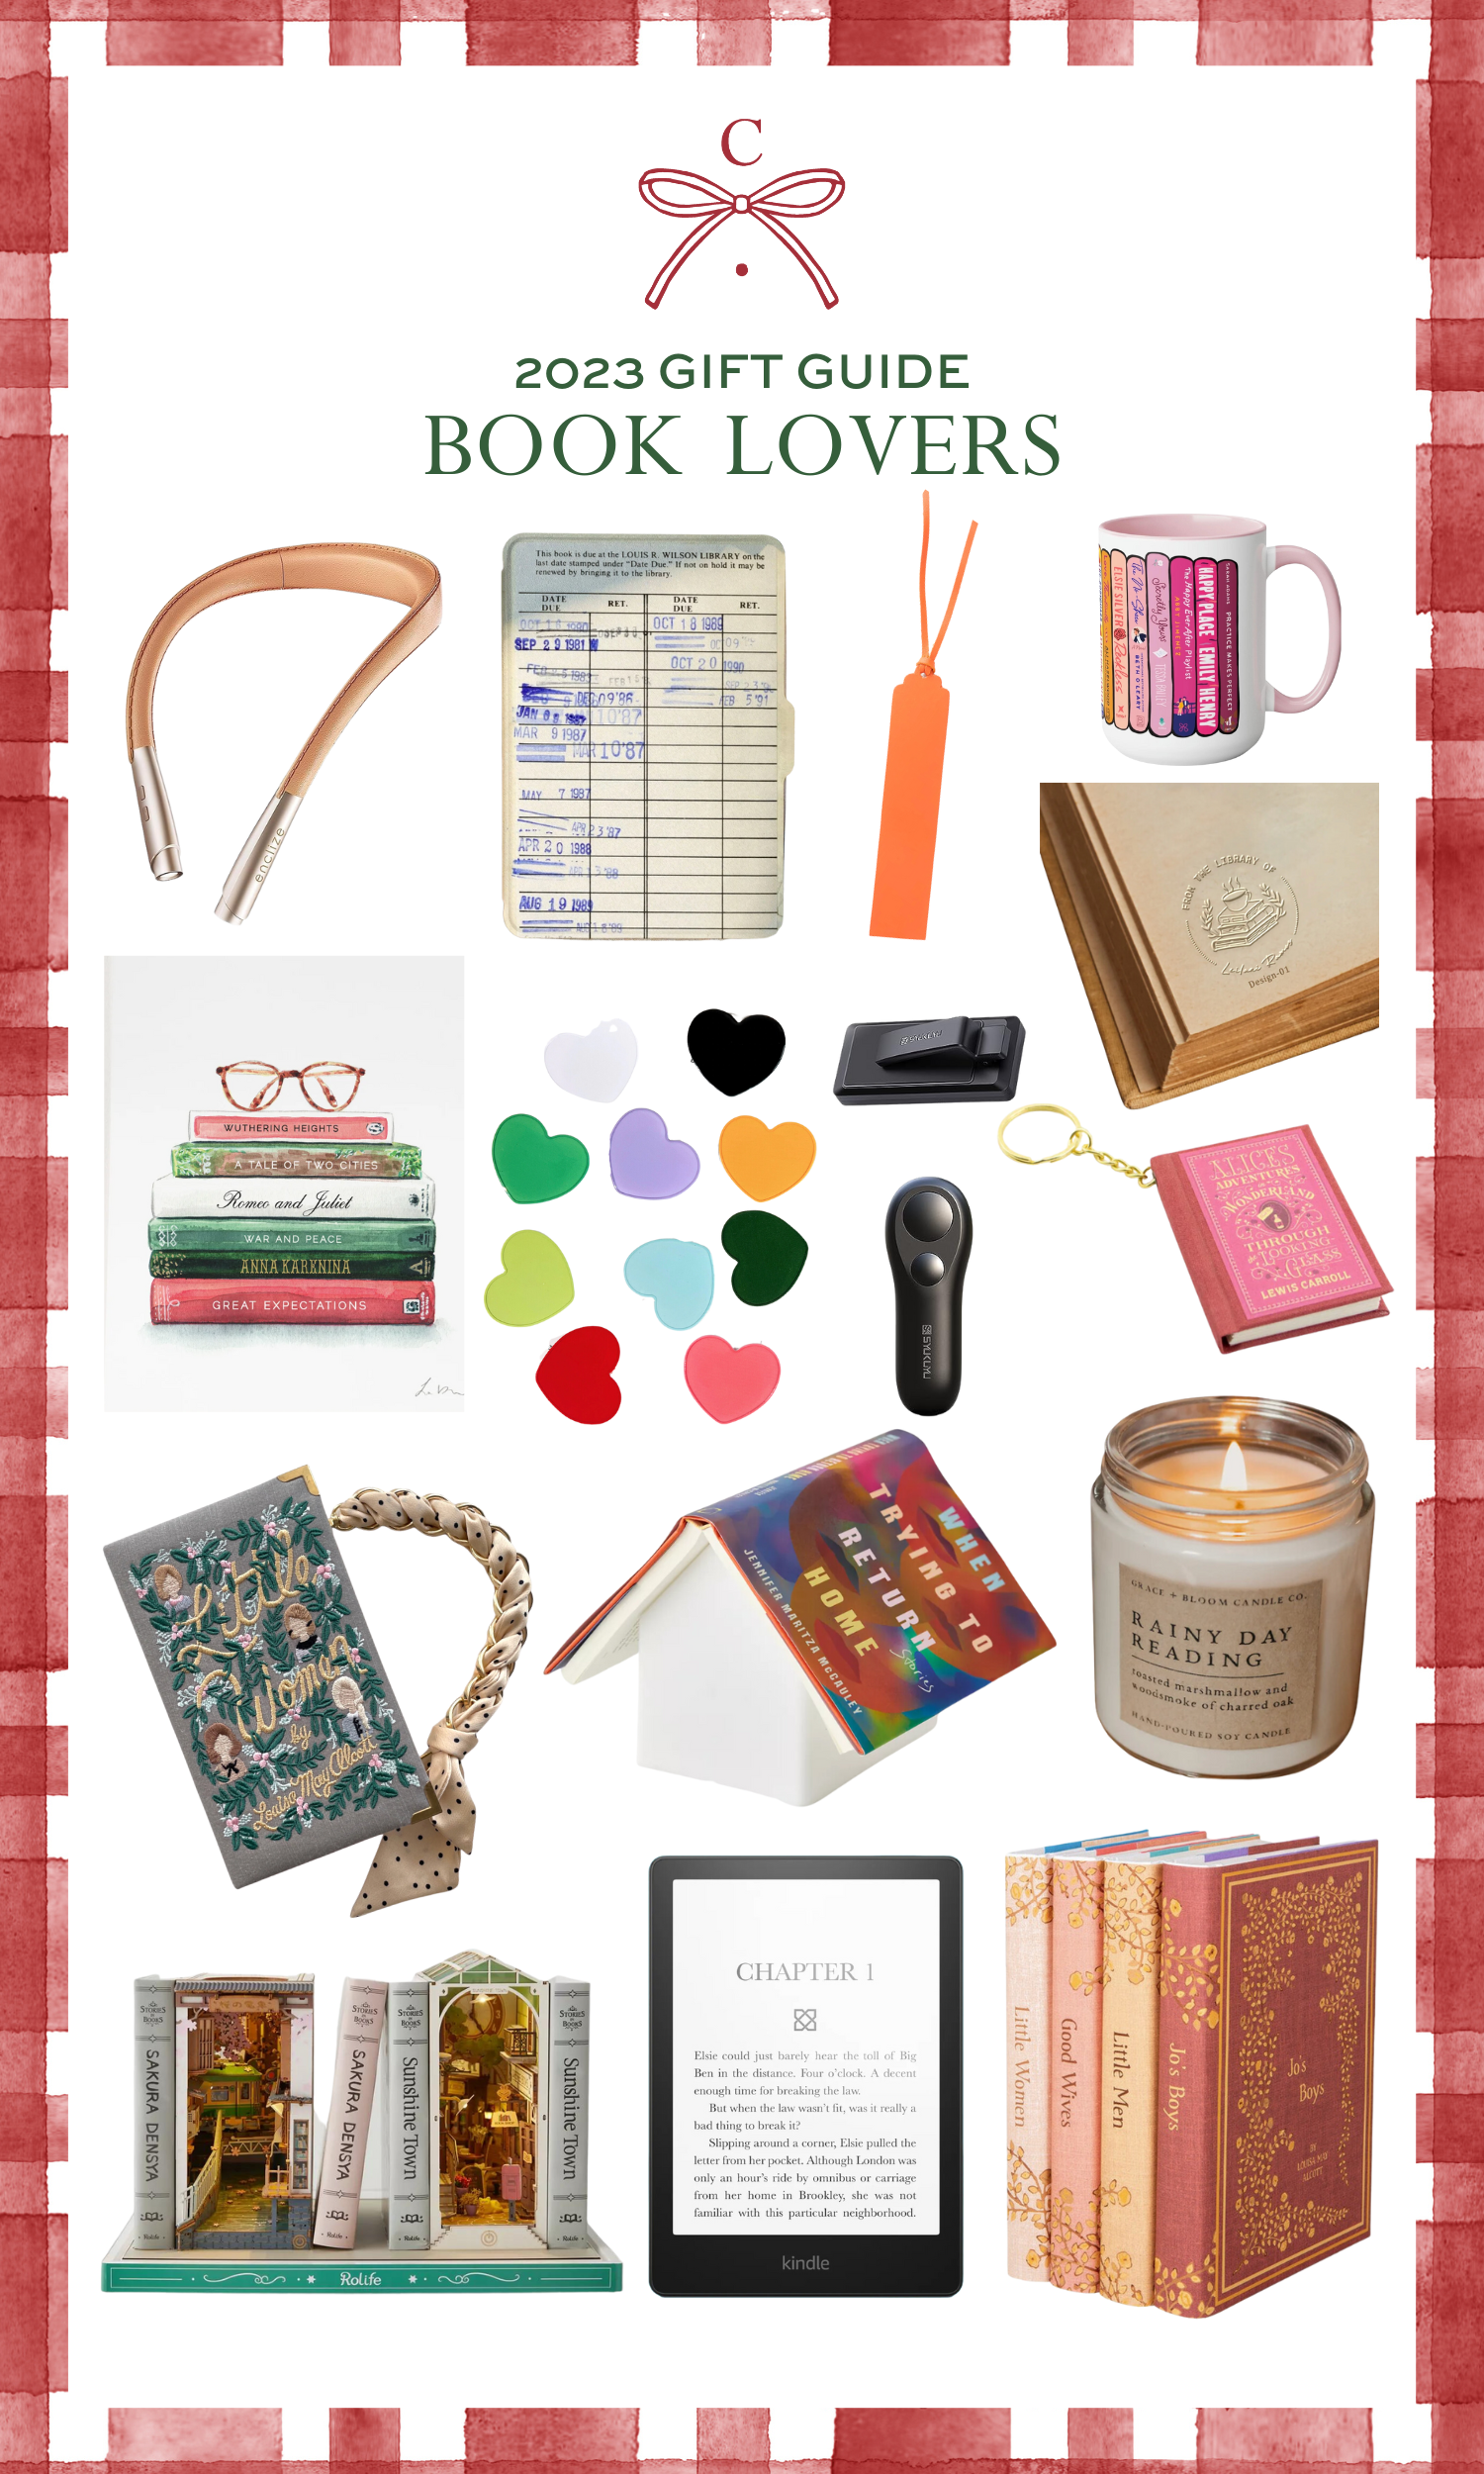  Gifts for book lovers women: Reading journals for book tracking:  Studio, SandMI: Libros